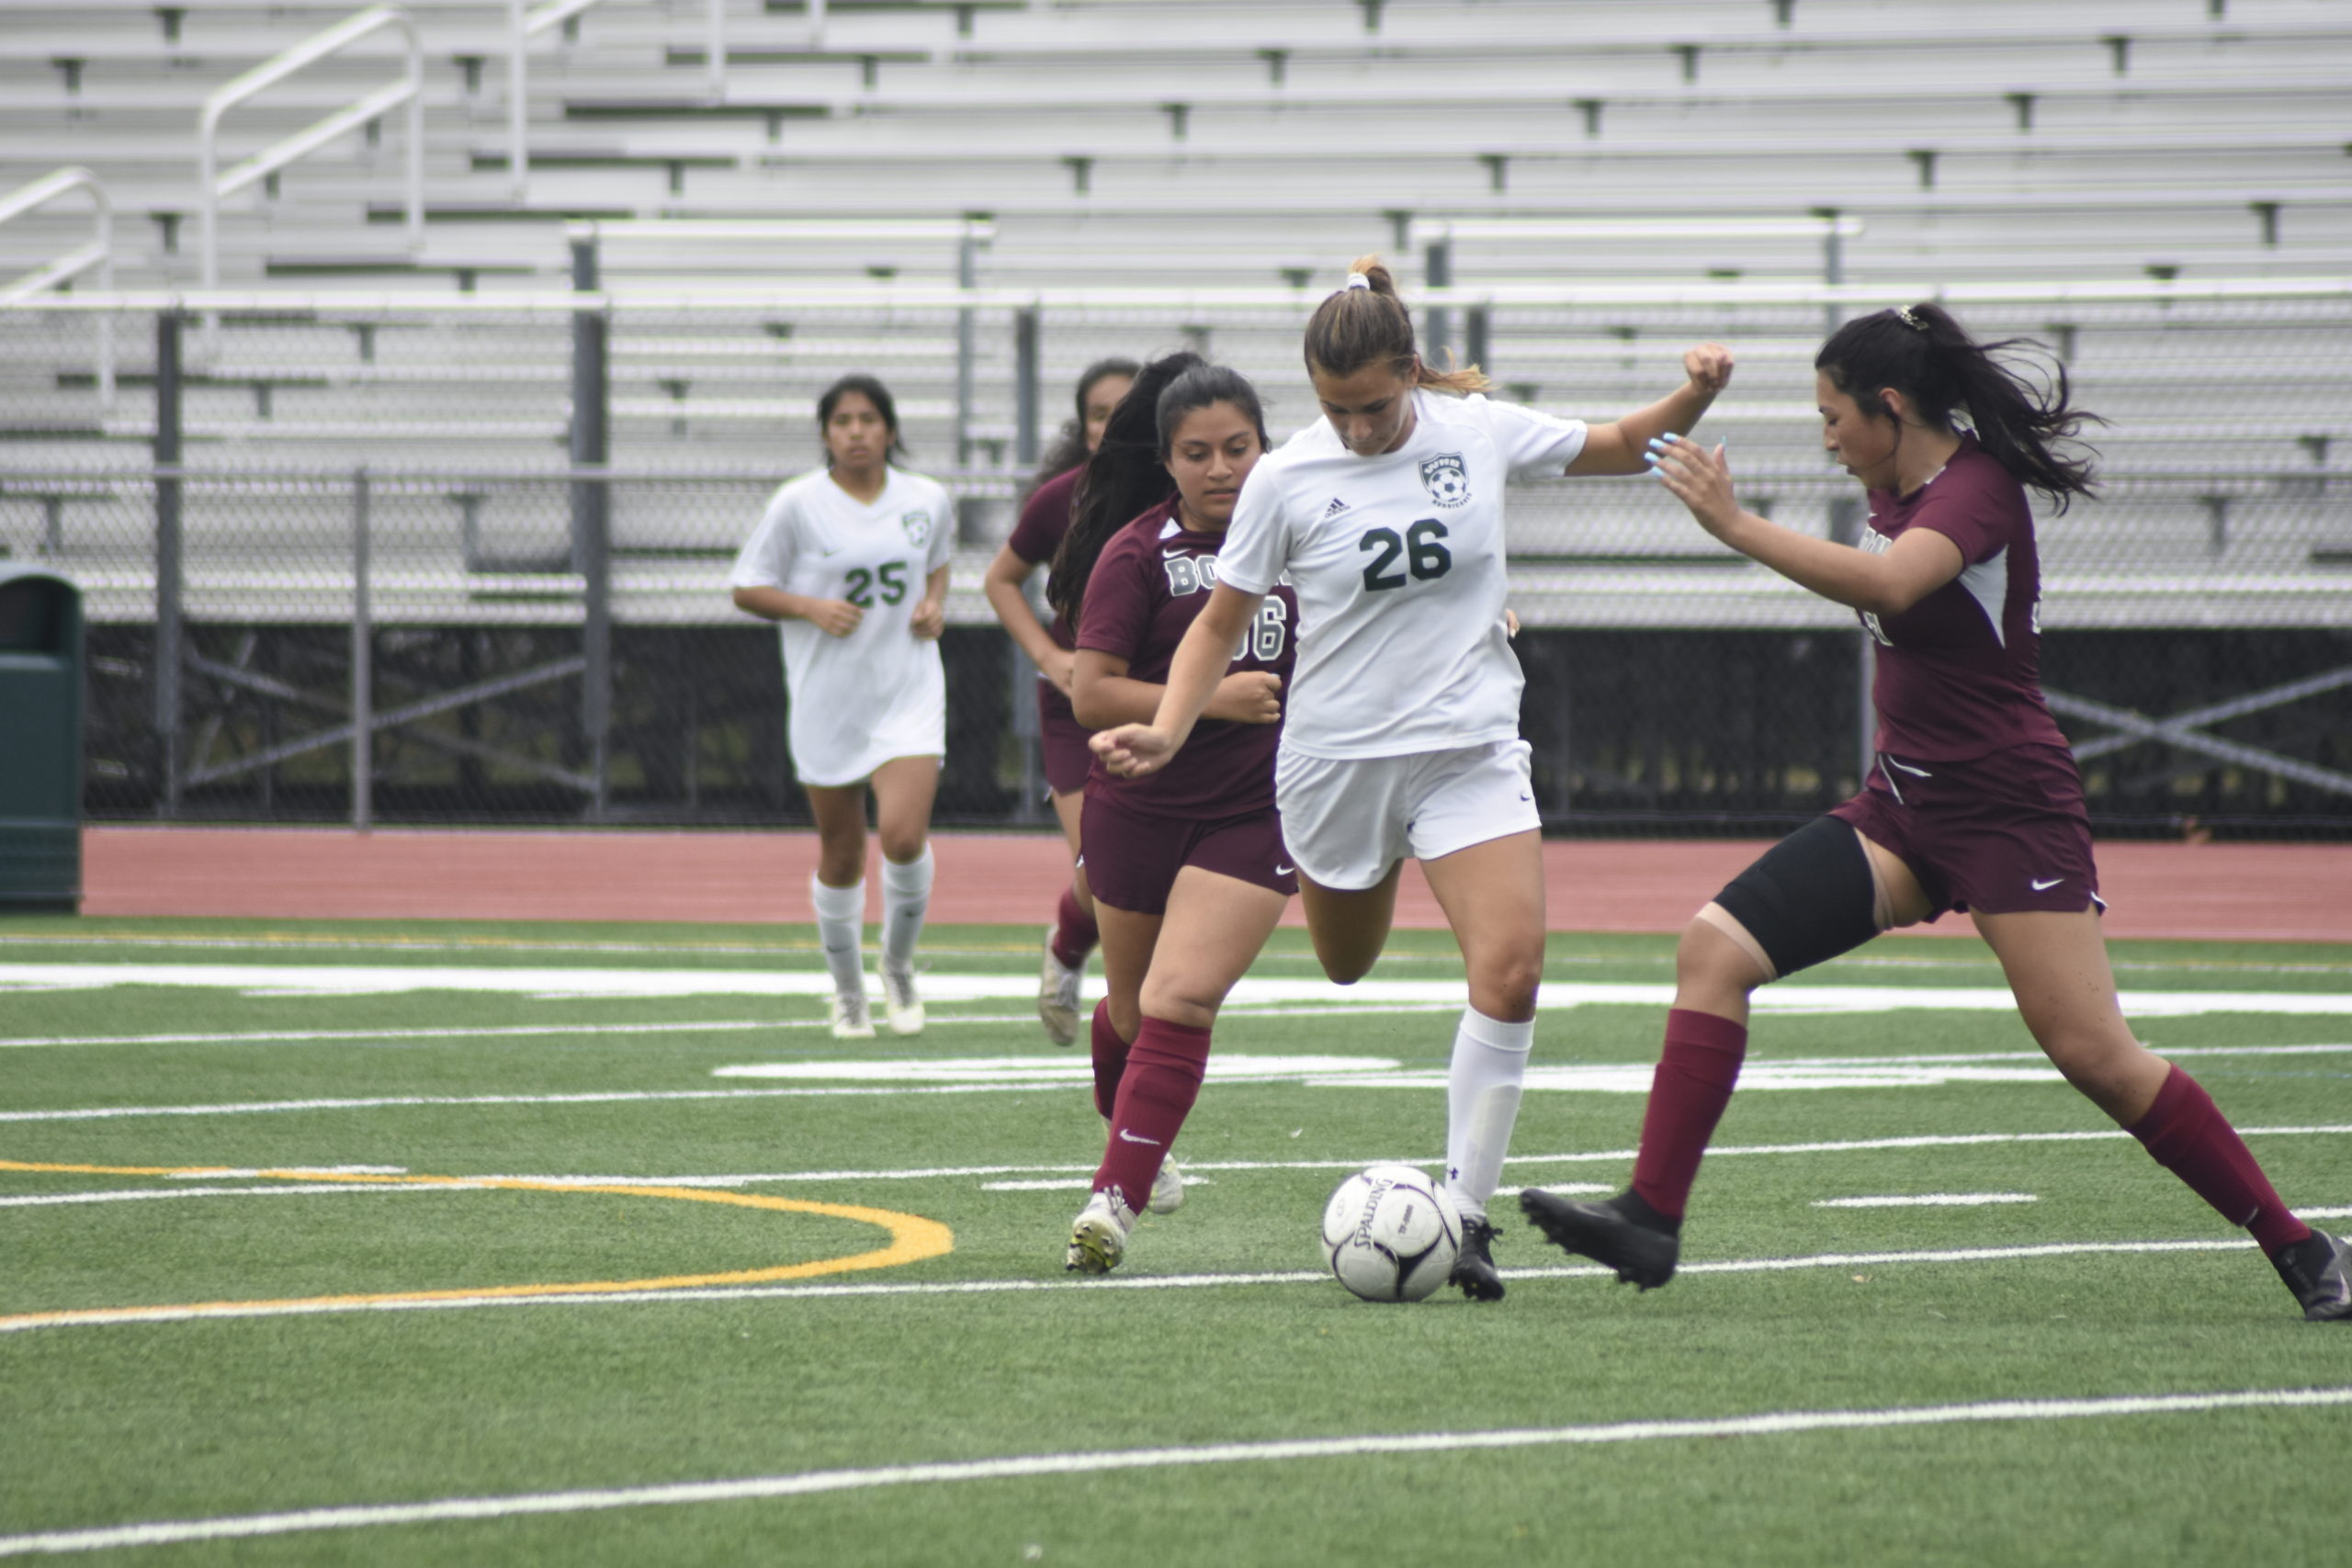 Sensing pressure from a pair of East Hampton players, Westhampton Beach junior Isabella Blanco clears the ball.